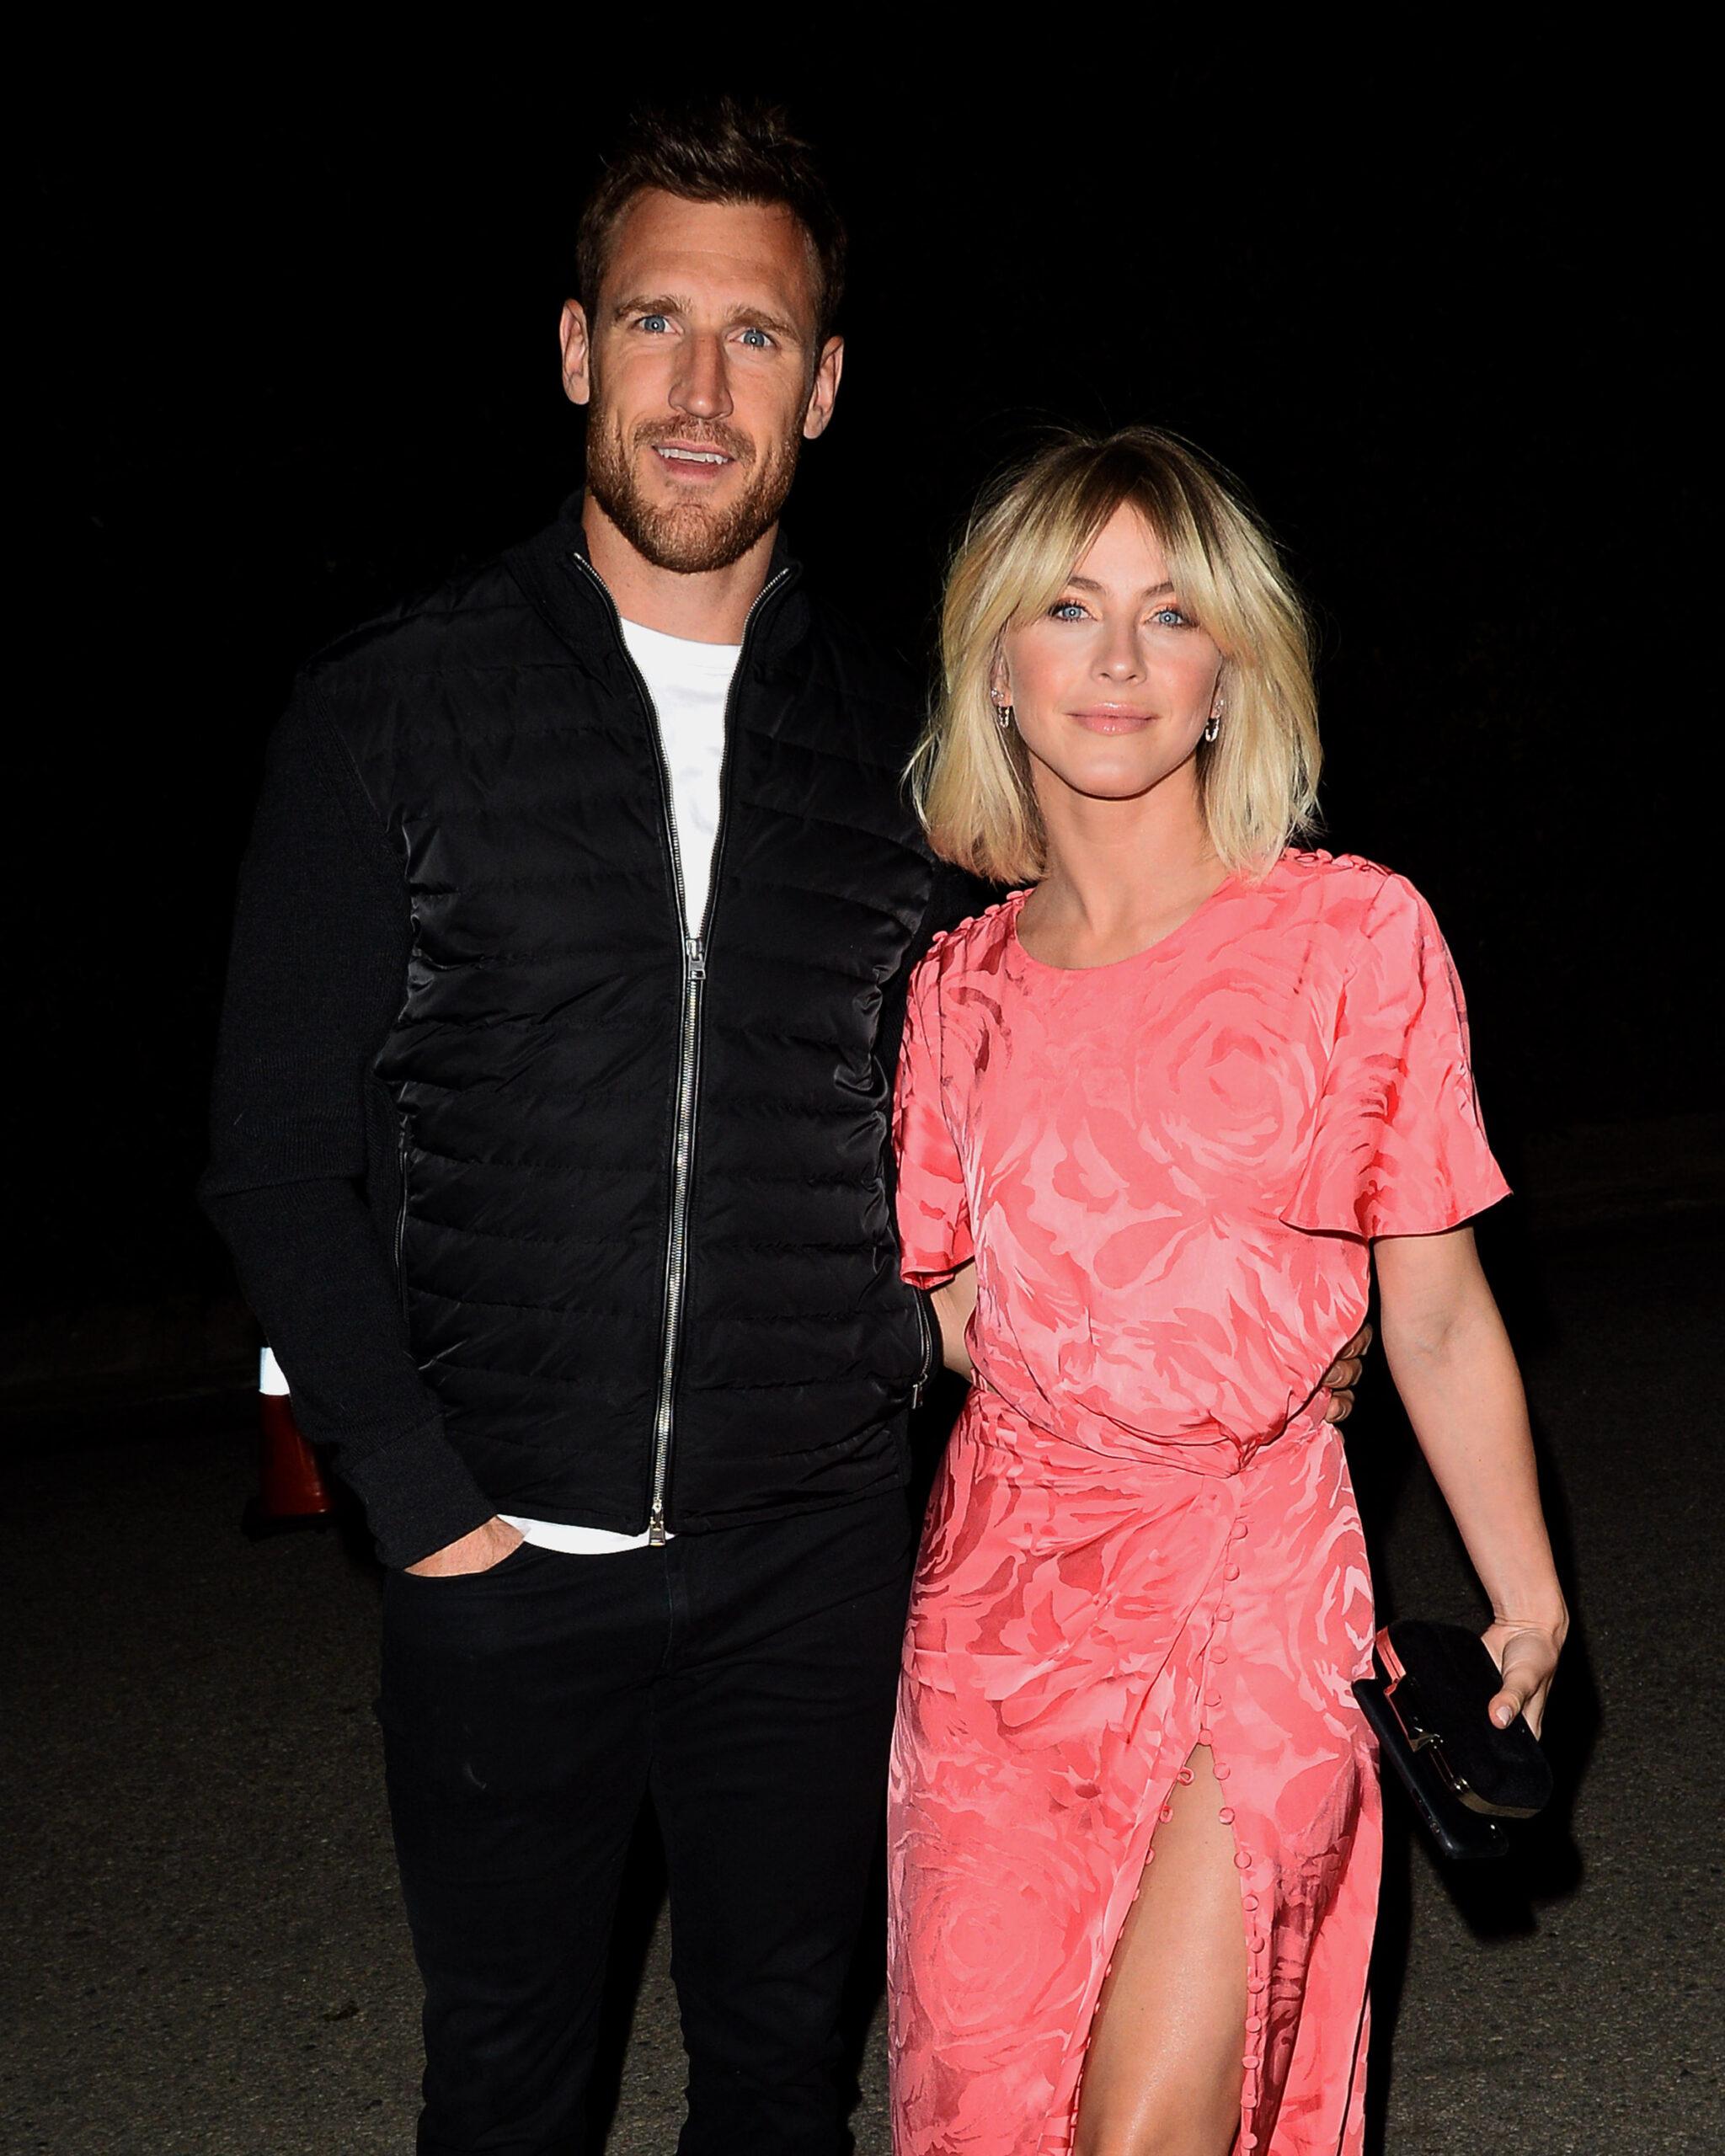 Julianne Hough and Brooks Laich at the 2019 WME Talent Agency Party